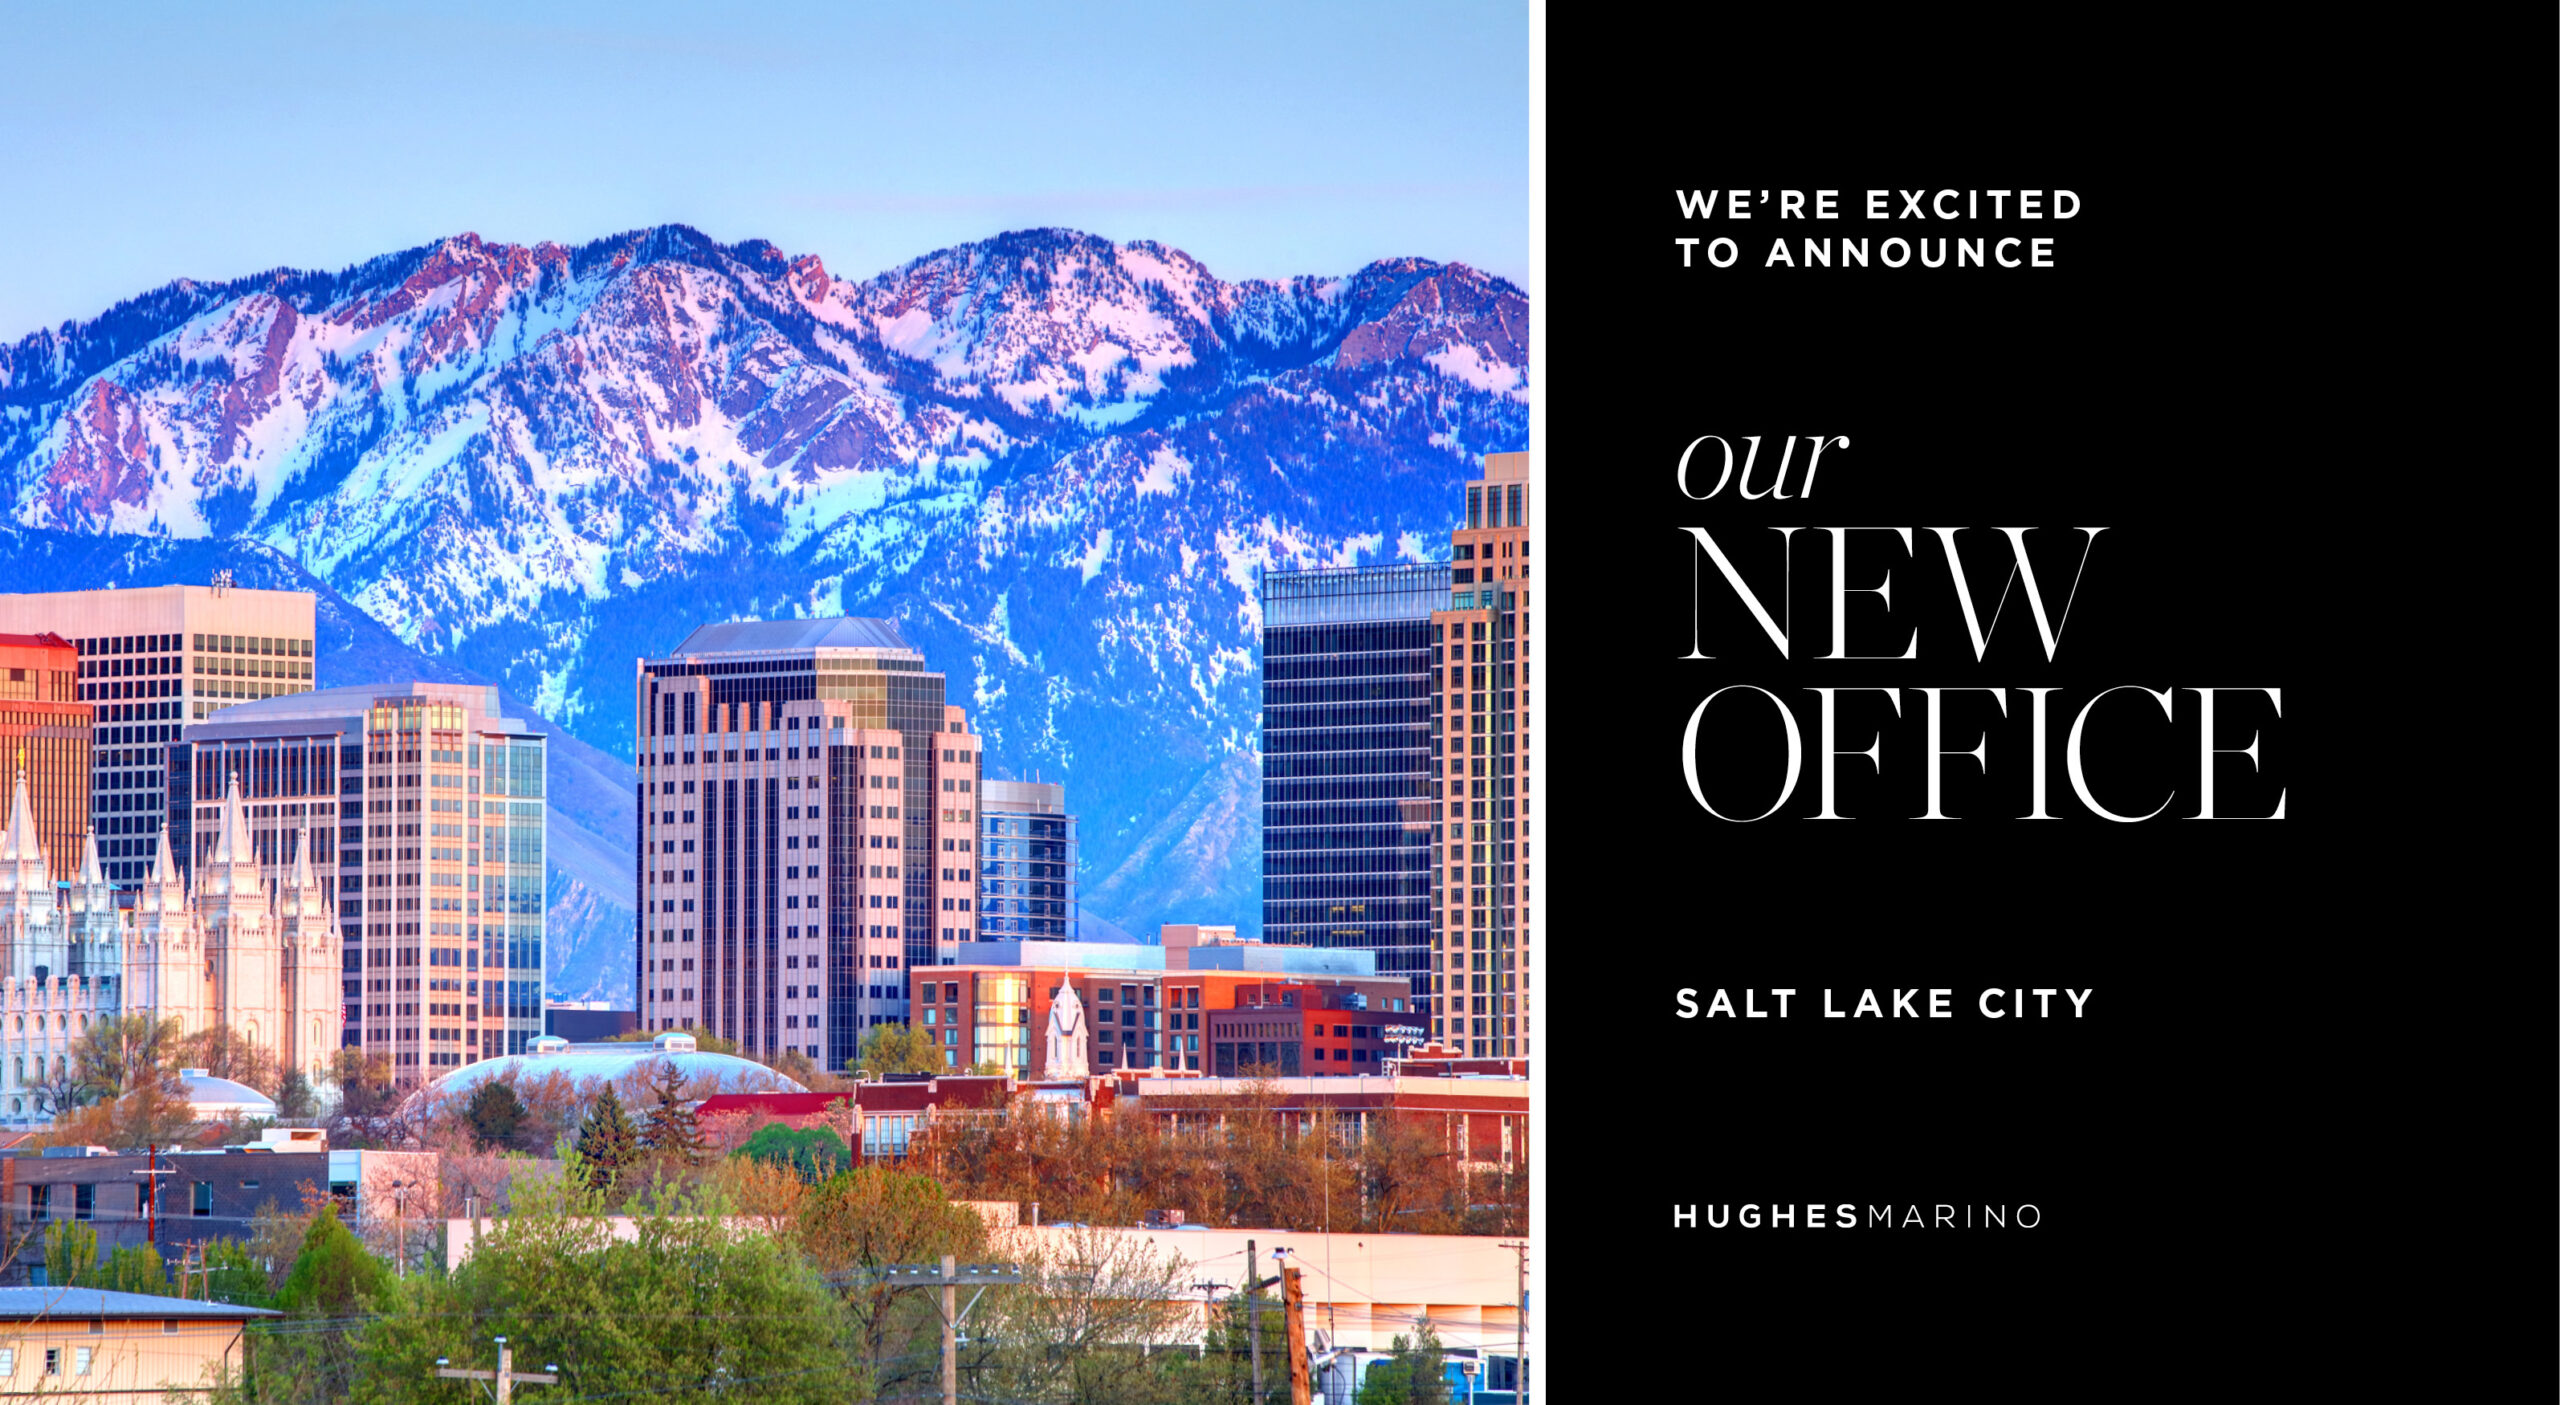 Our New Office - Salt Lake City